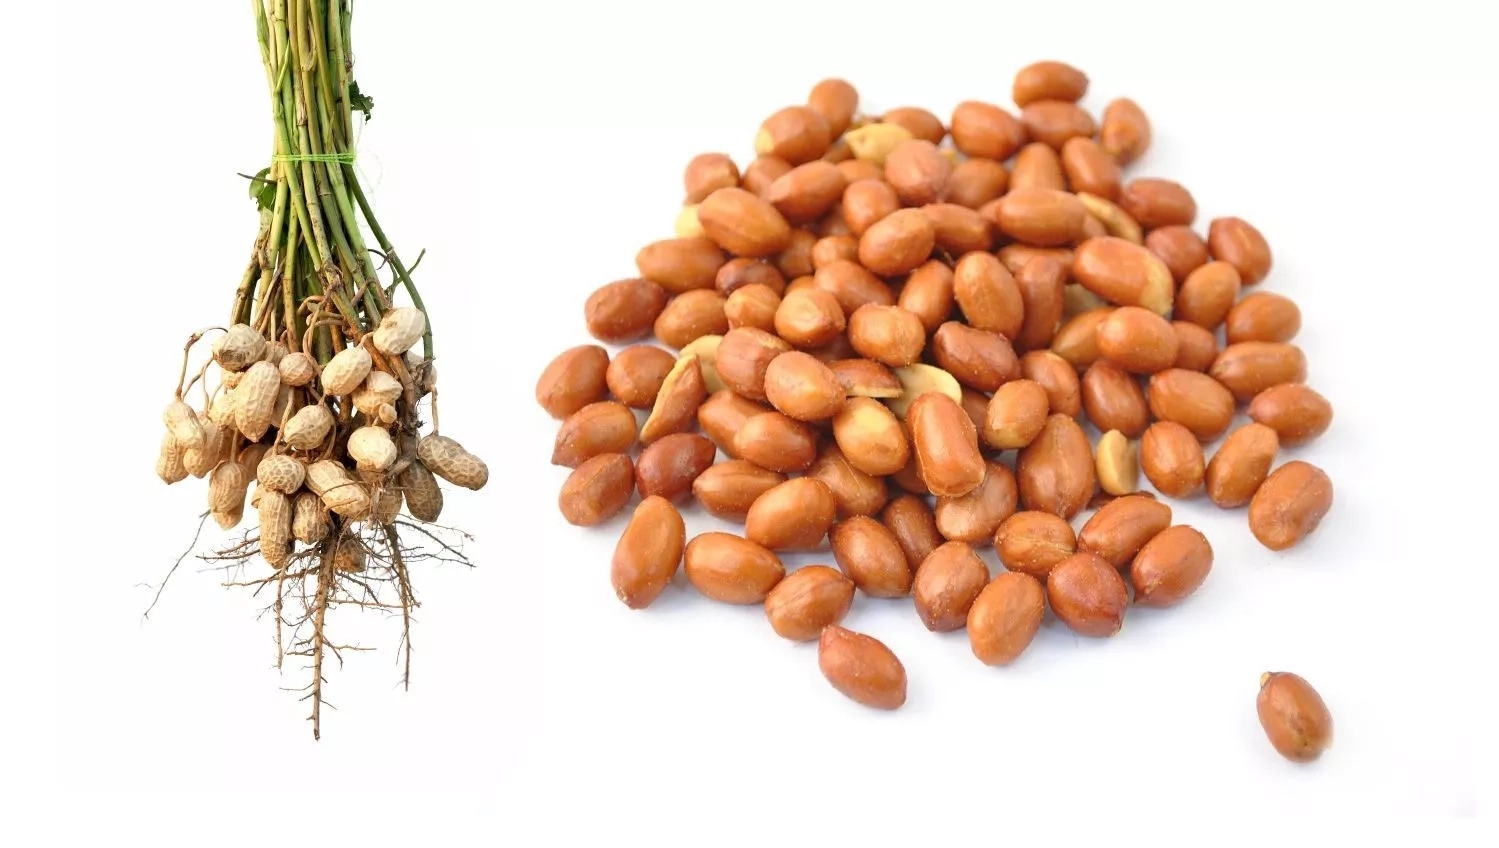 Scientific difference between fresh groundnuts vs oil fried groundnuts